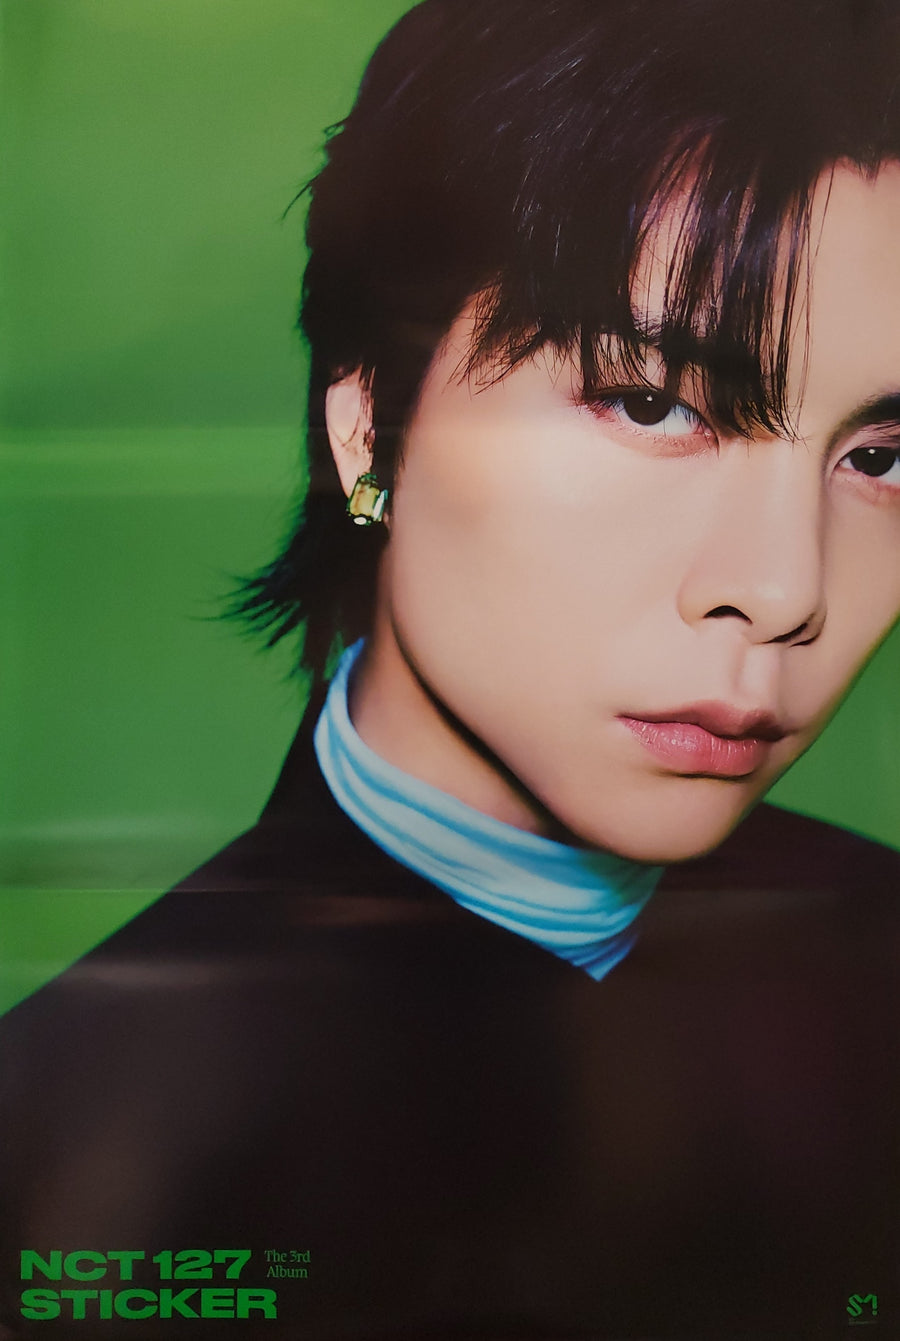 NCT 127 3rd Album Sticker (Jewel Case) Official Poster - Photo Concept Johnny